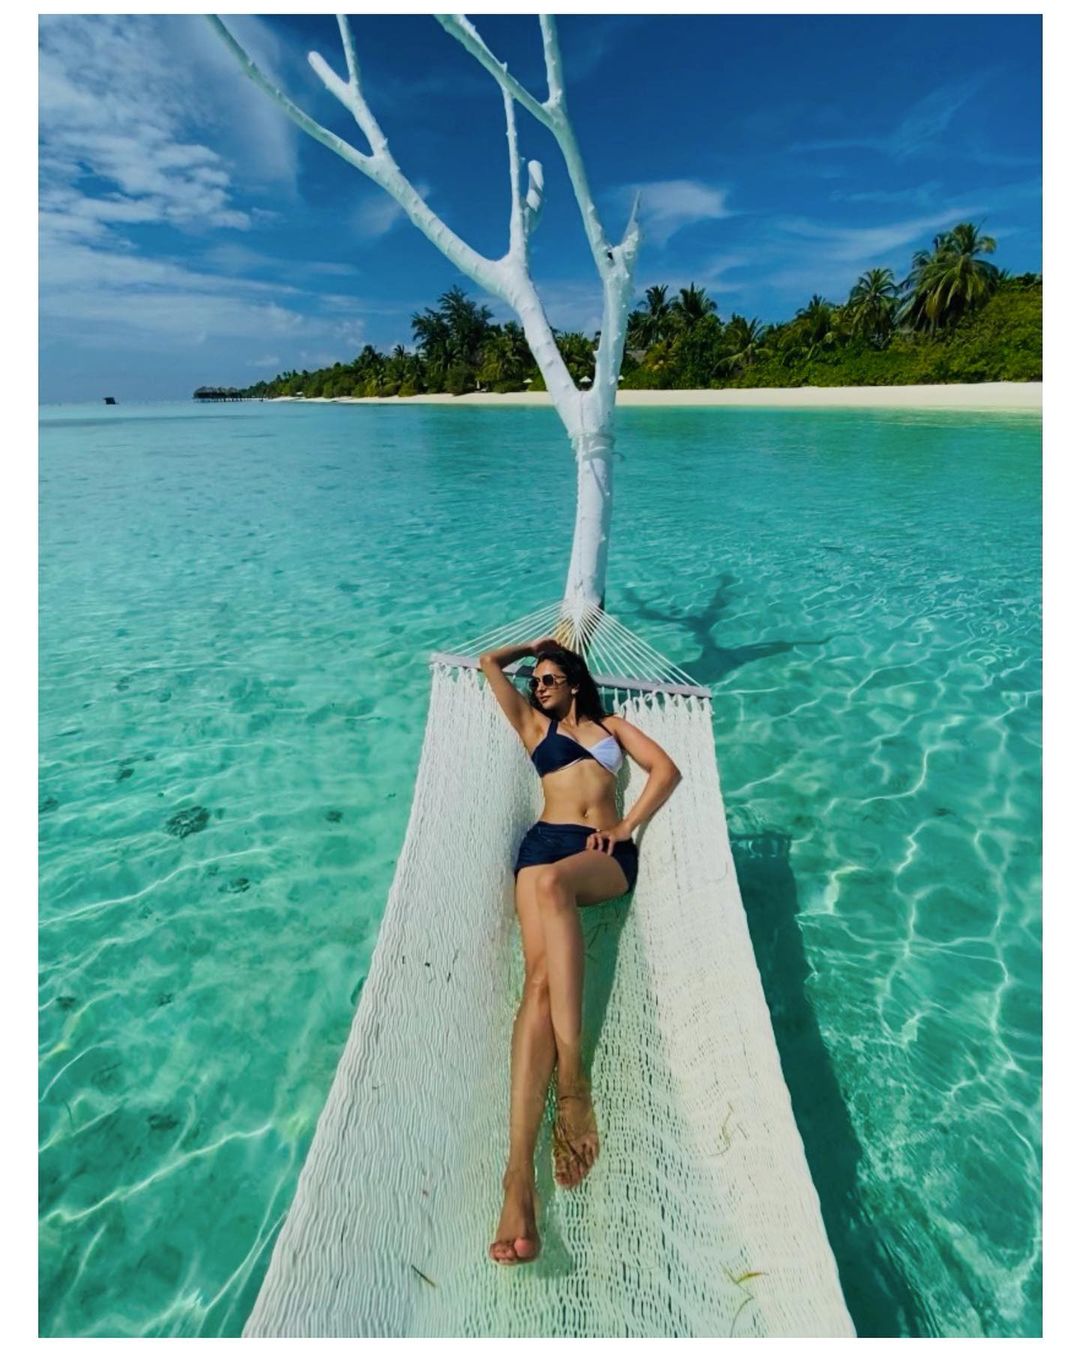  Rakul Preet Singh is one of the promising young actresses of Bollywood. Aside from her work across multiple film industries, she also has a stellar social media presence. Scroll through as we round up some of her hottest moments. (Image: Instagram)